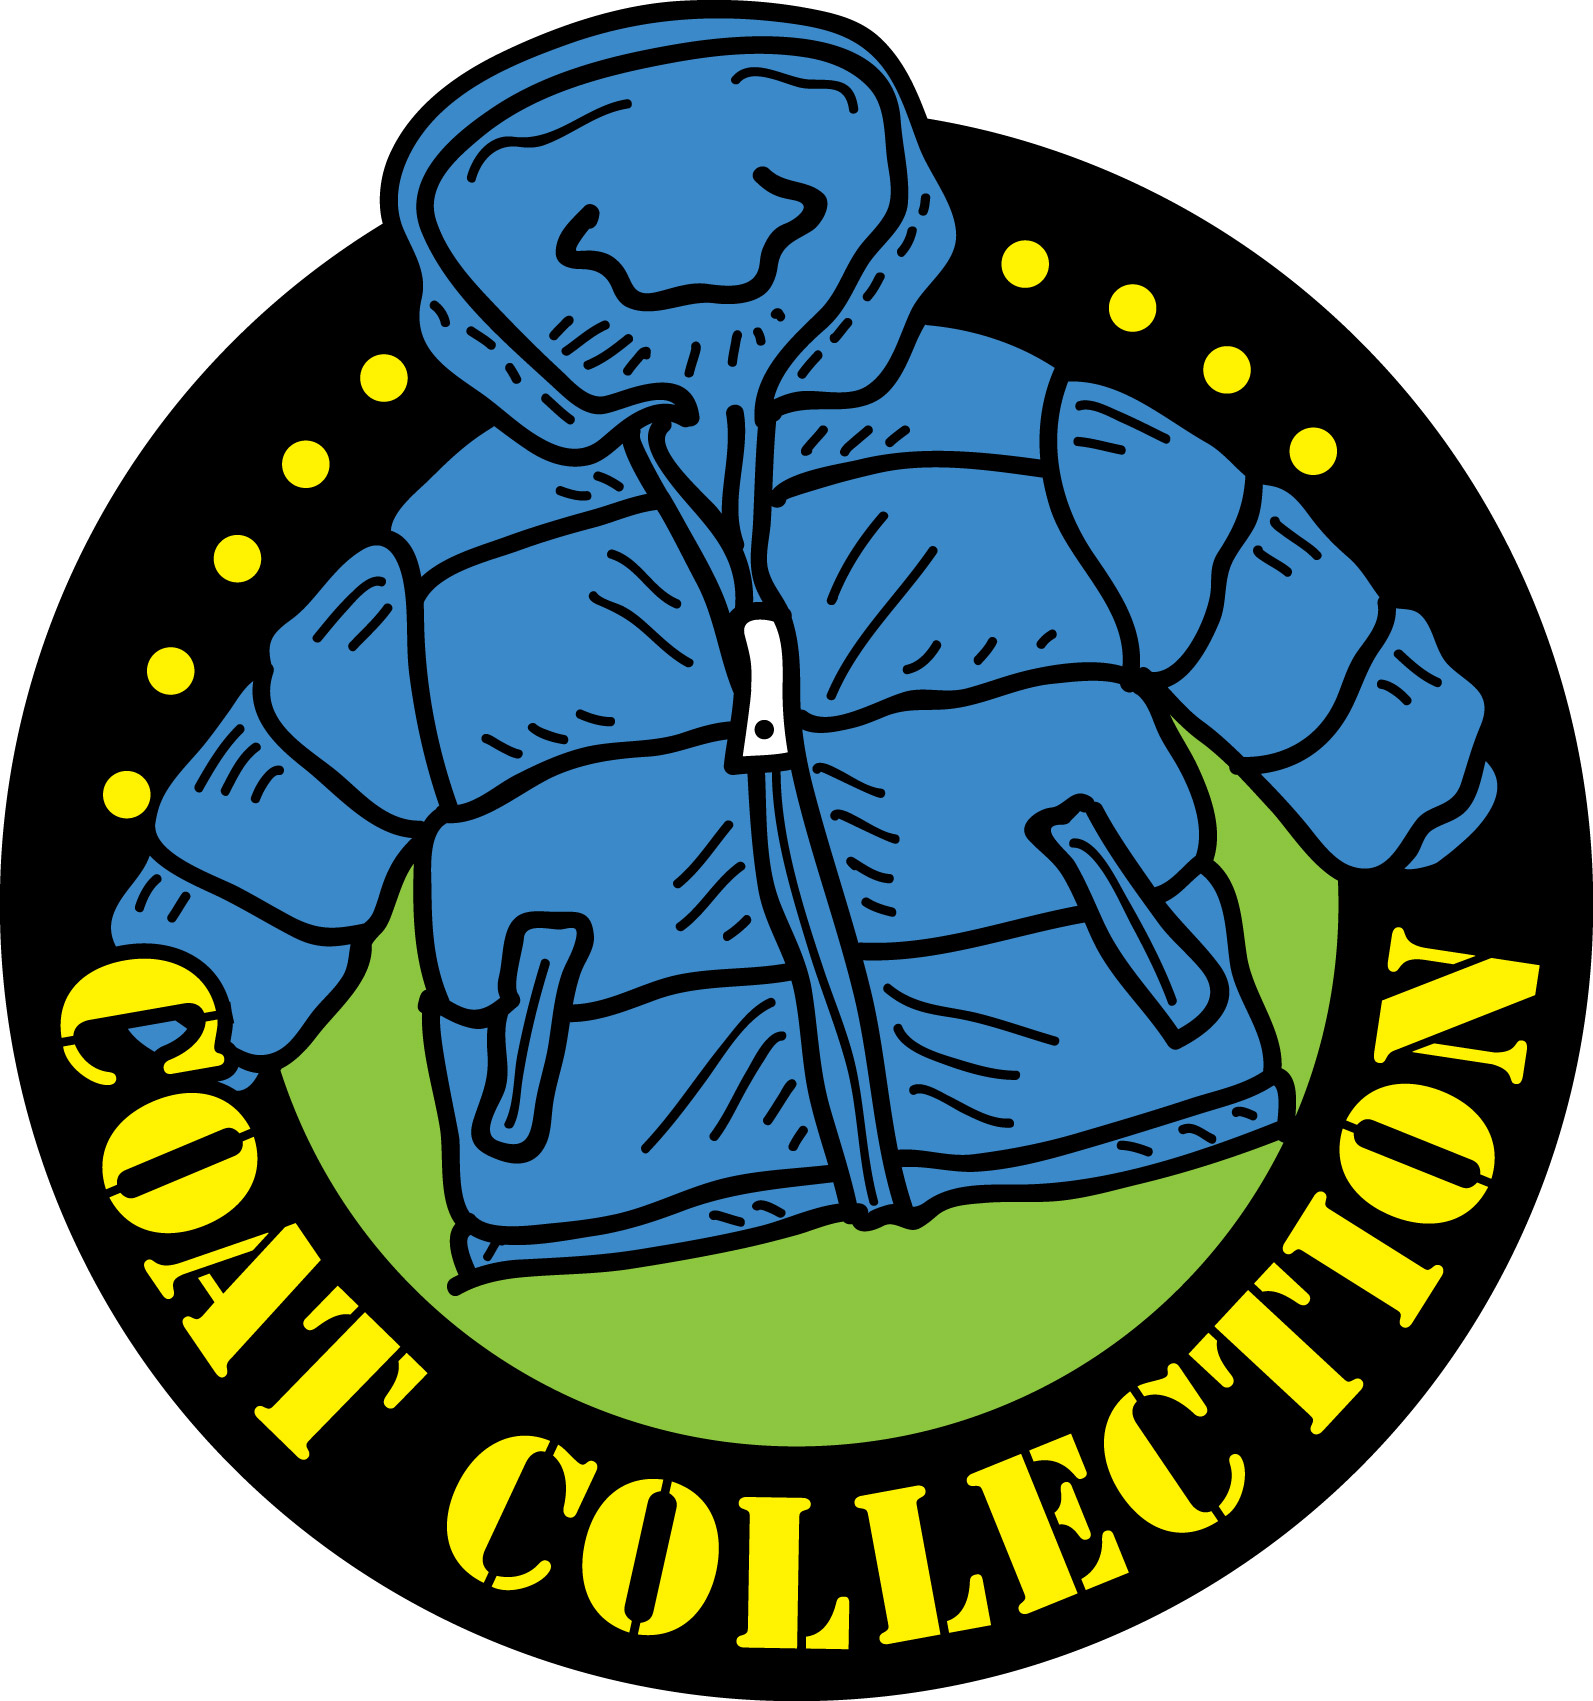 Coat Drive For Holy Trinity Thrift Shop   St  George S Episcopal